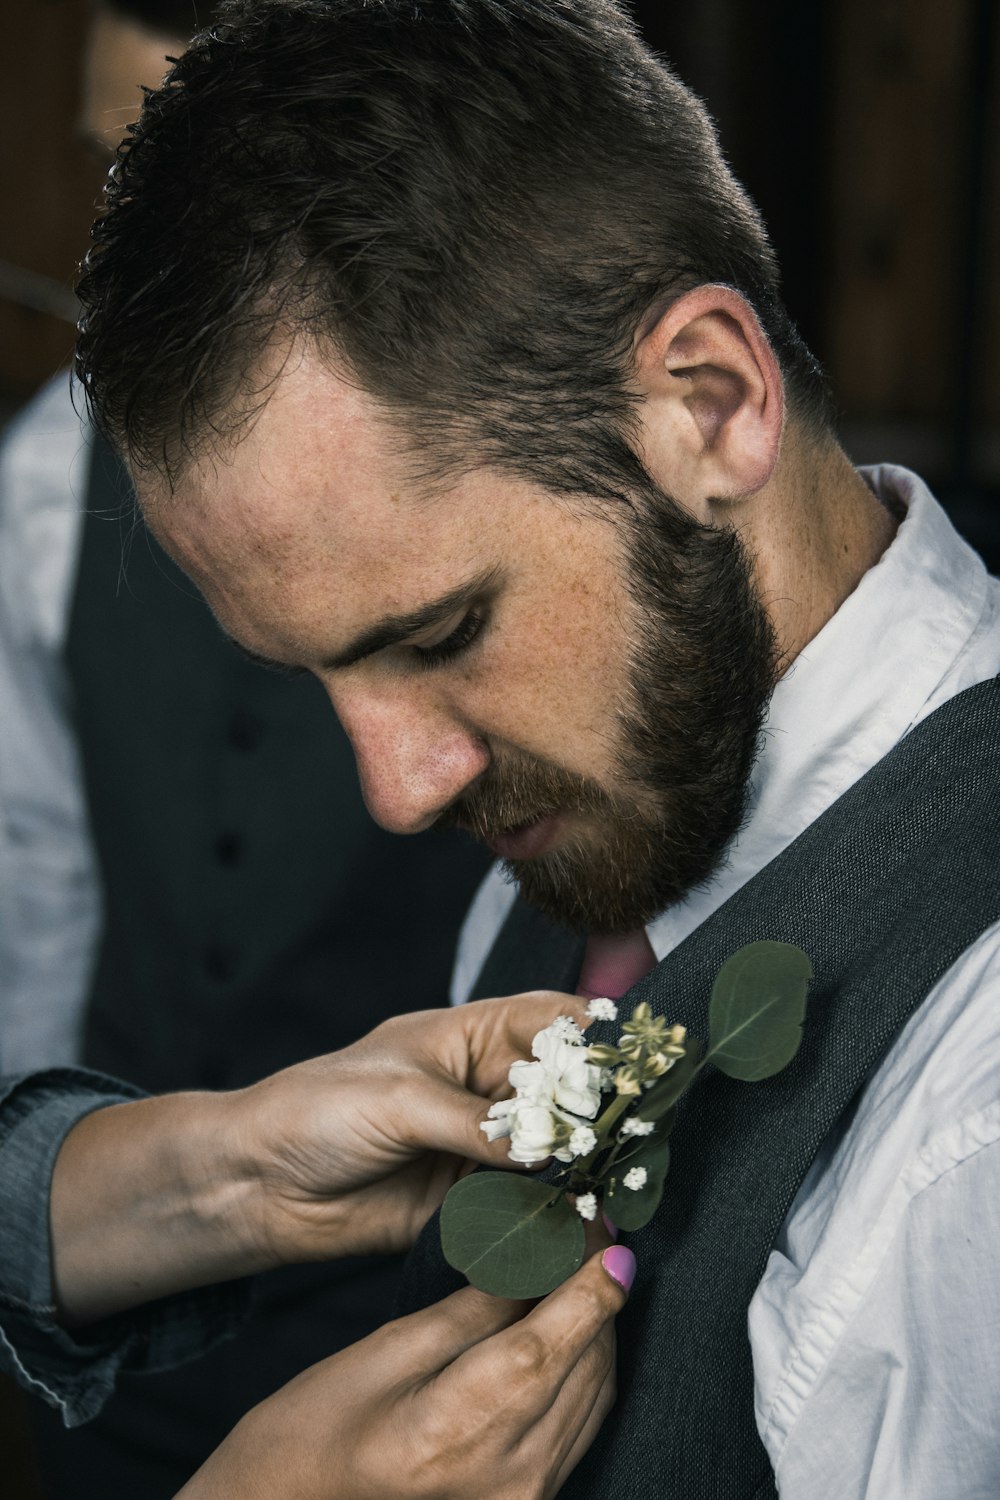 a man is putting a boutonniere on his tie